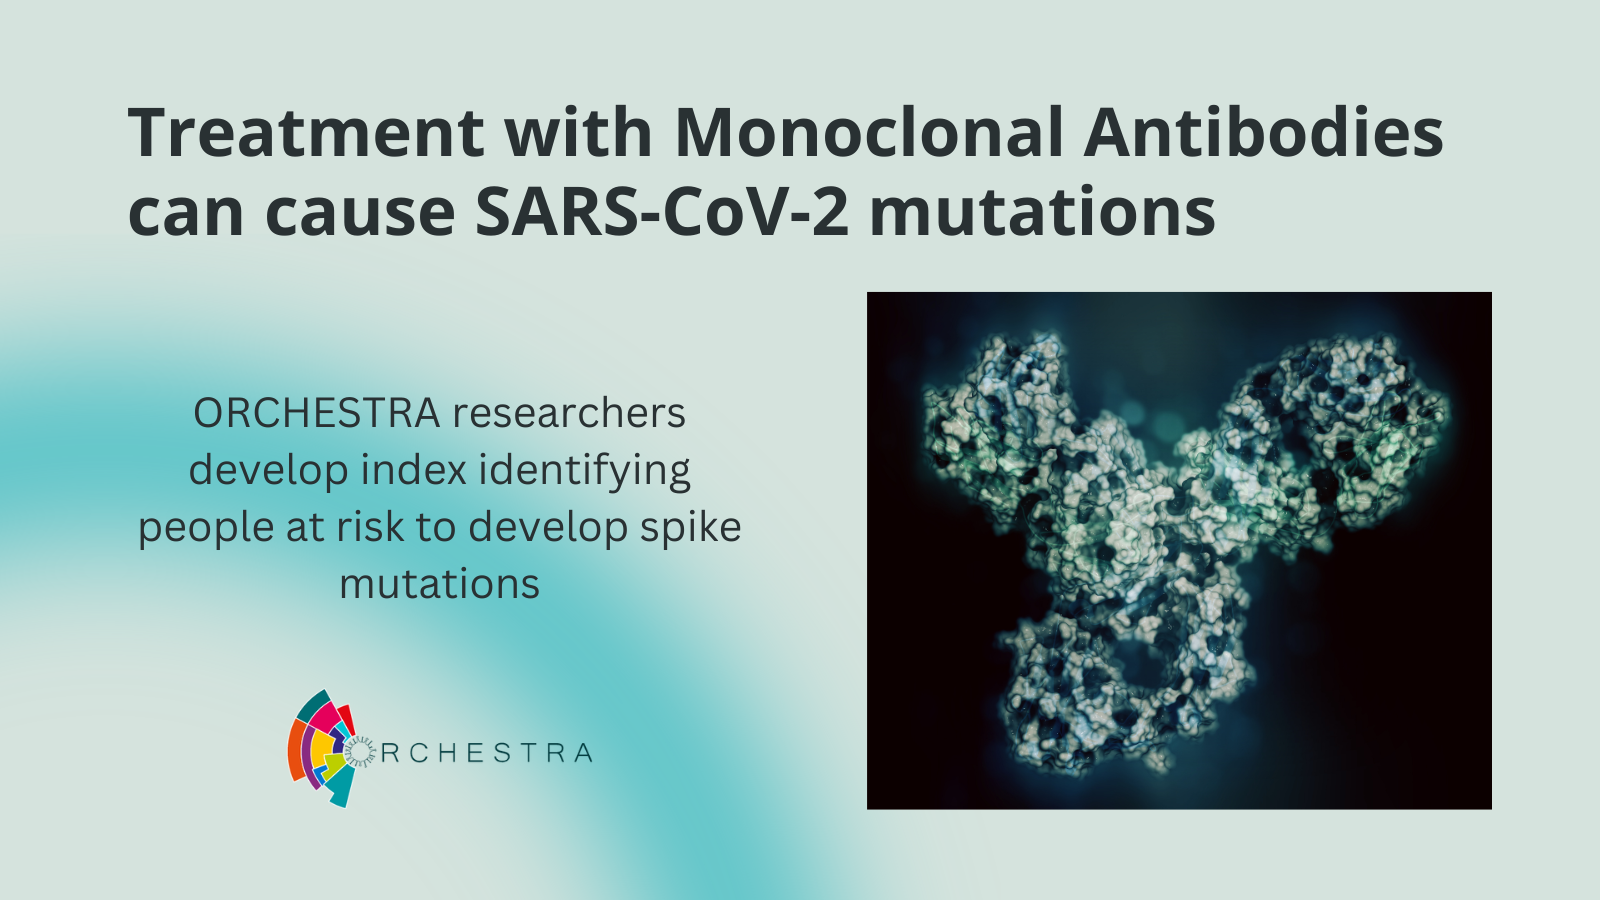 Treatment with Monoclonal Antibodies can cause SARS-CoV-2 mutations – researchers develop score identifying patients at risk